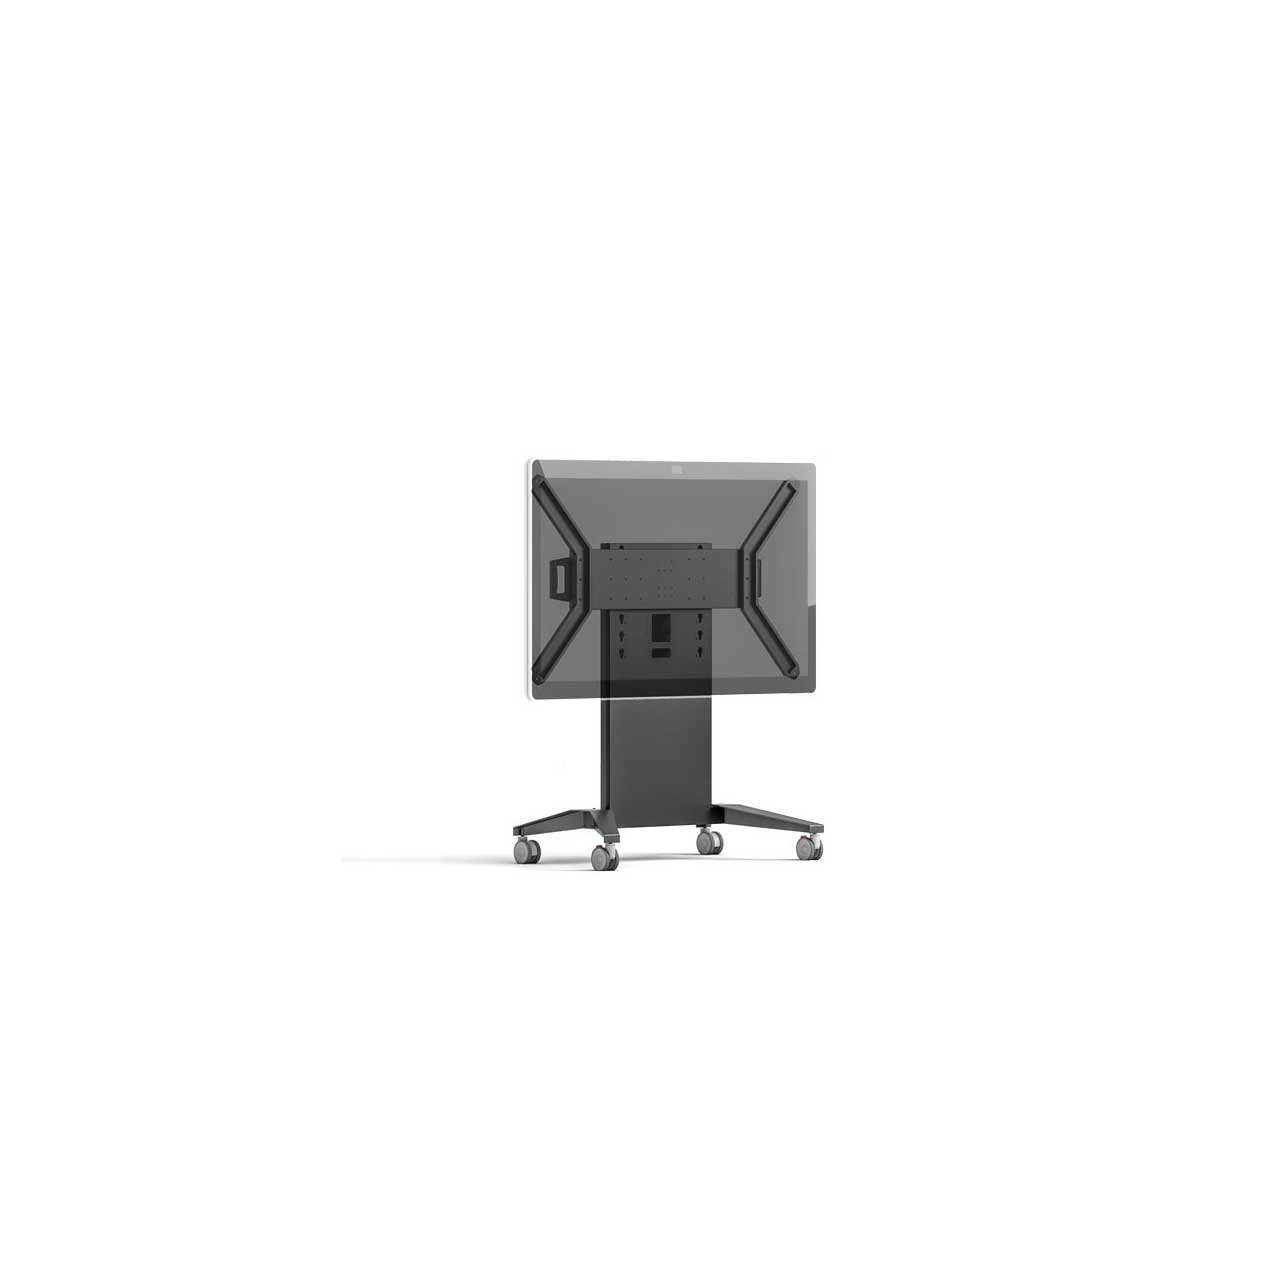 Salamander Designs FPS1XL/FH/C3/GG Cisco Webex Board Mobile Display Stand - Fixed Height - 85 Inch SAL-FPS1XLFHC3GG